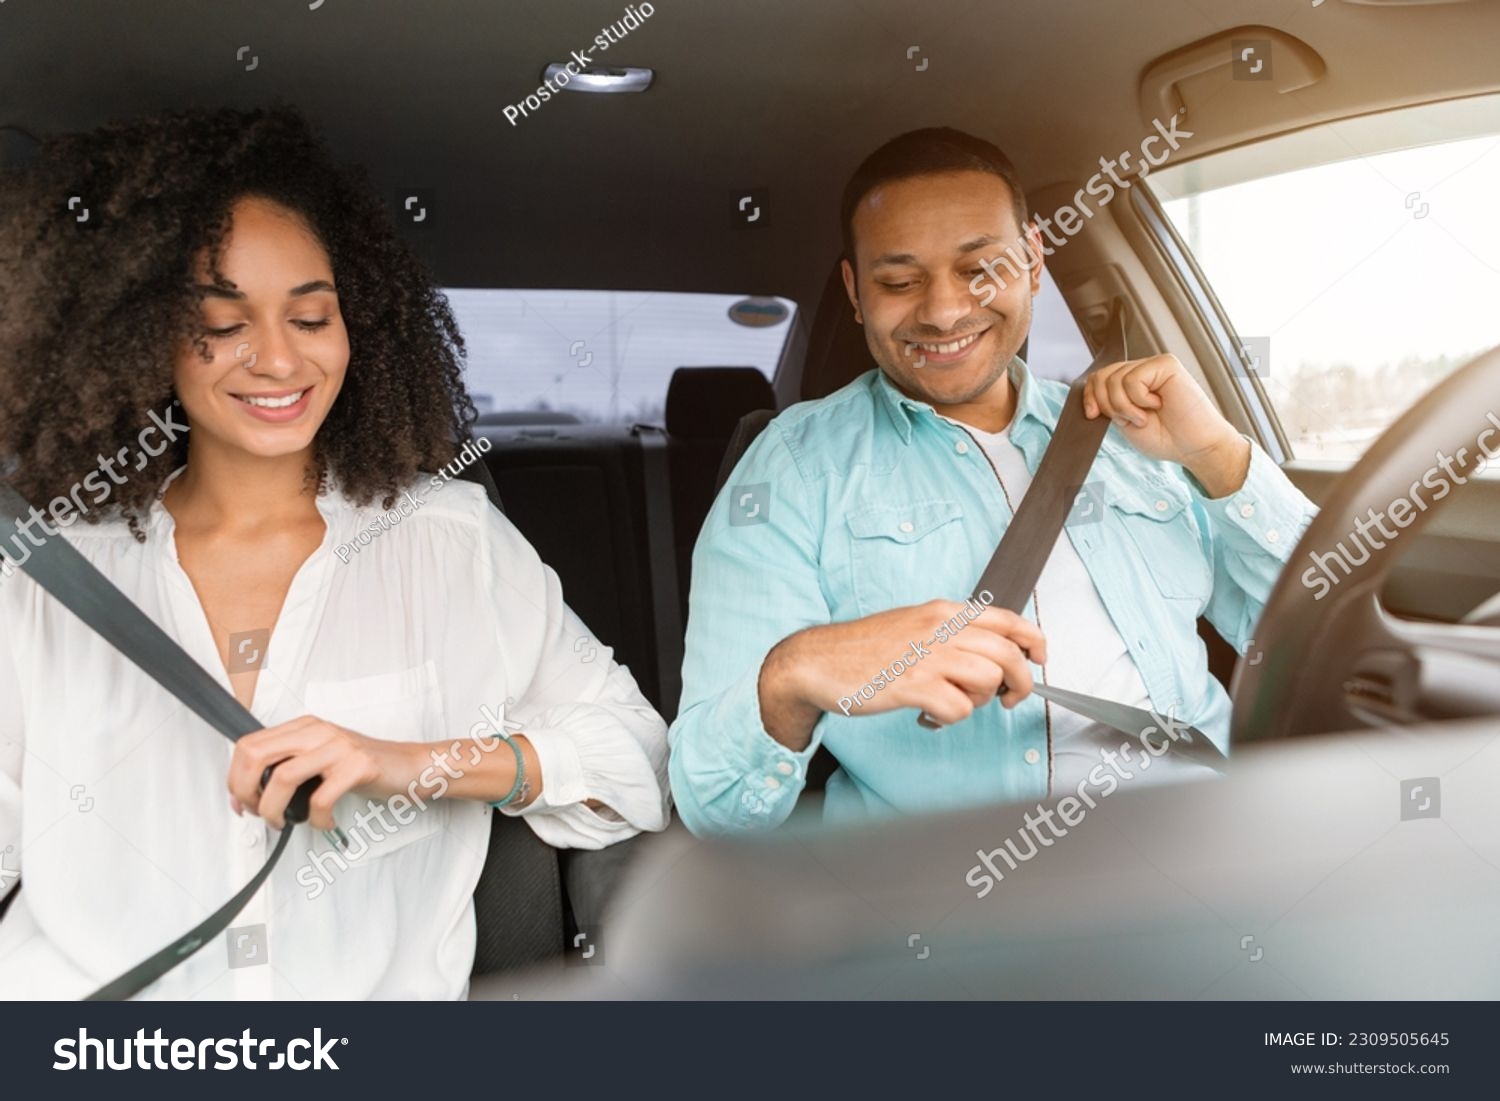 Road Safety Concept. Middle eastern couple practicing safe driving habits, wearing seat belts sitting in new car inside, enjoying comfort of vehicle. Safe Transportation And Auto Insurance Offer #2309505645